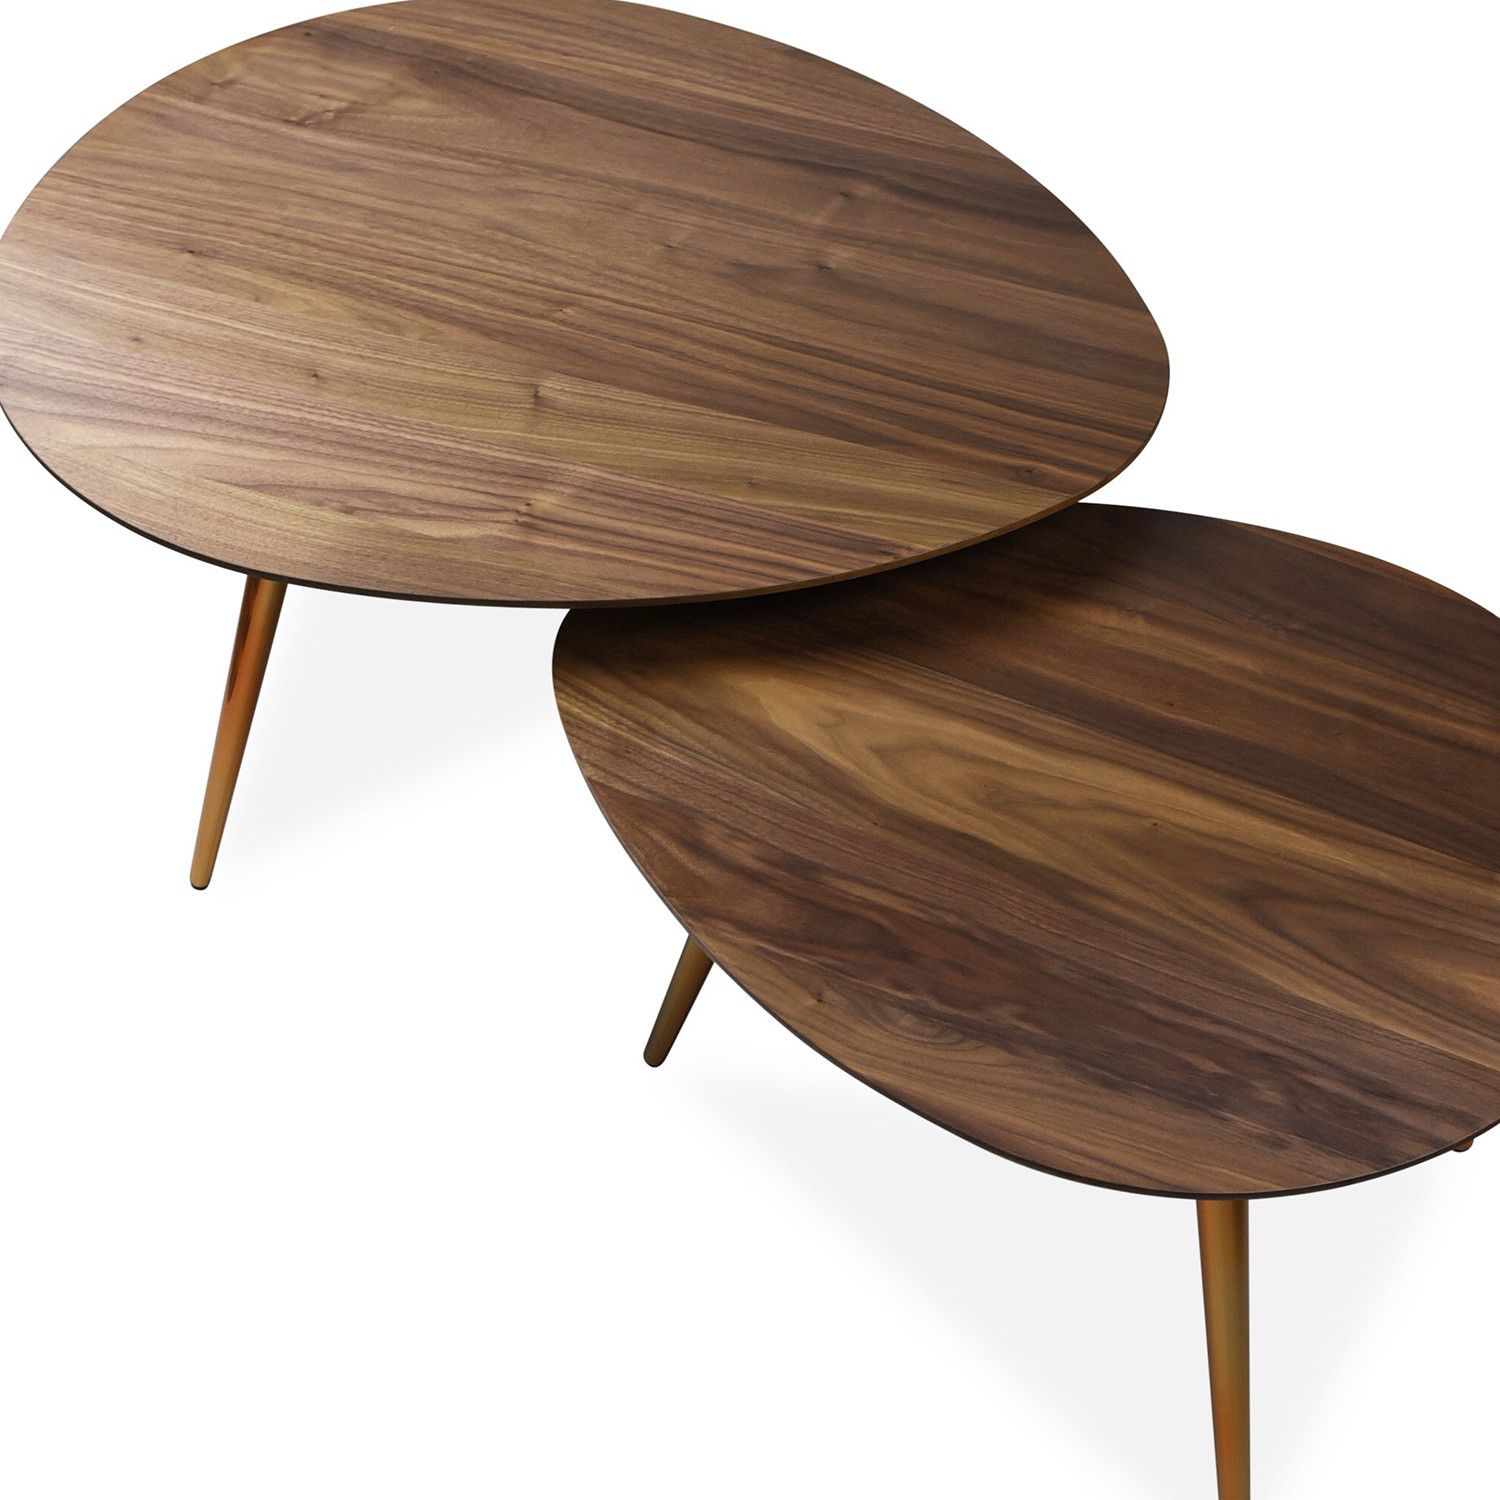 Maddox Mid Century Modern Nesting Coffee Table Set – Edloe Finch Intended For Mid Century Modern Coffee Tables (View 8 of 20)